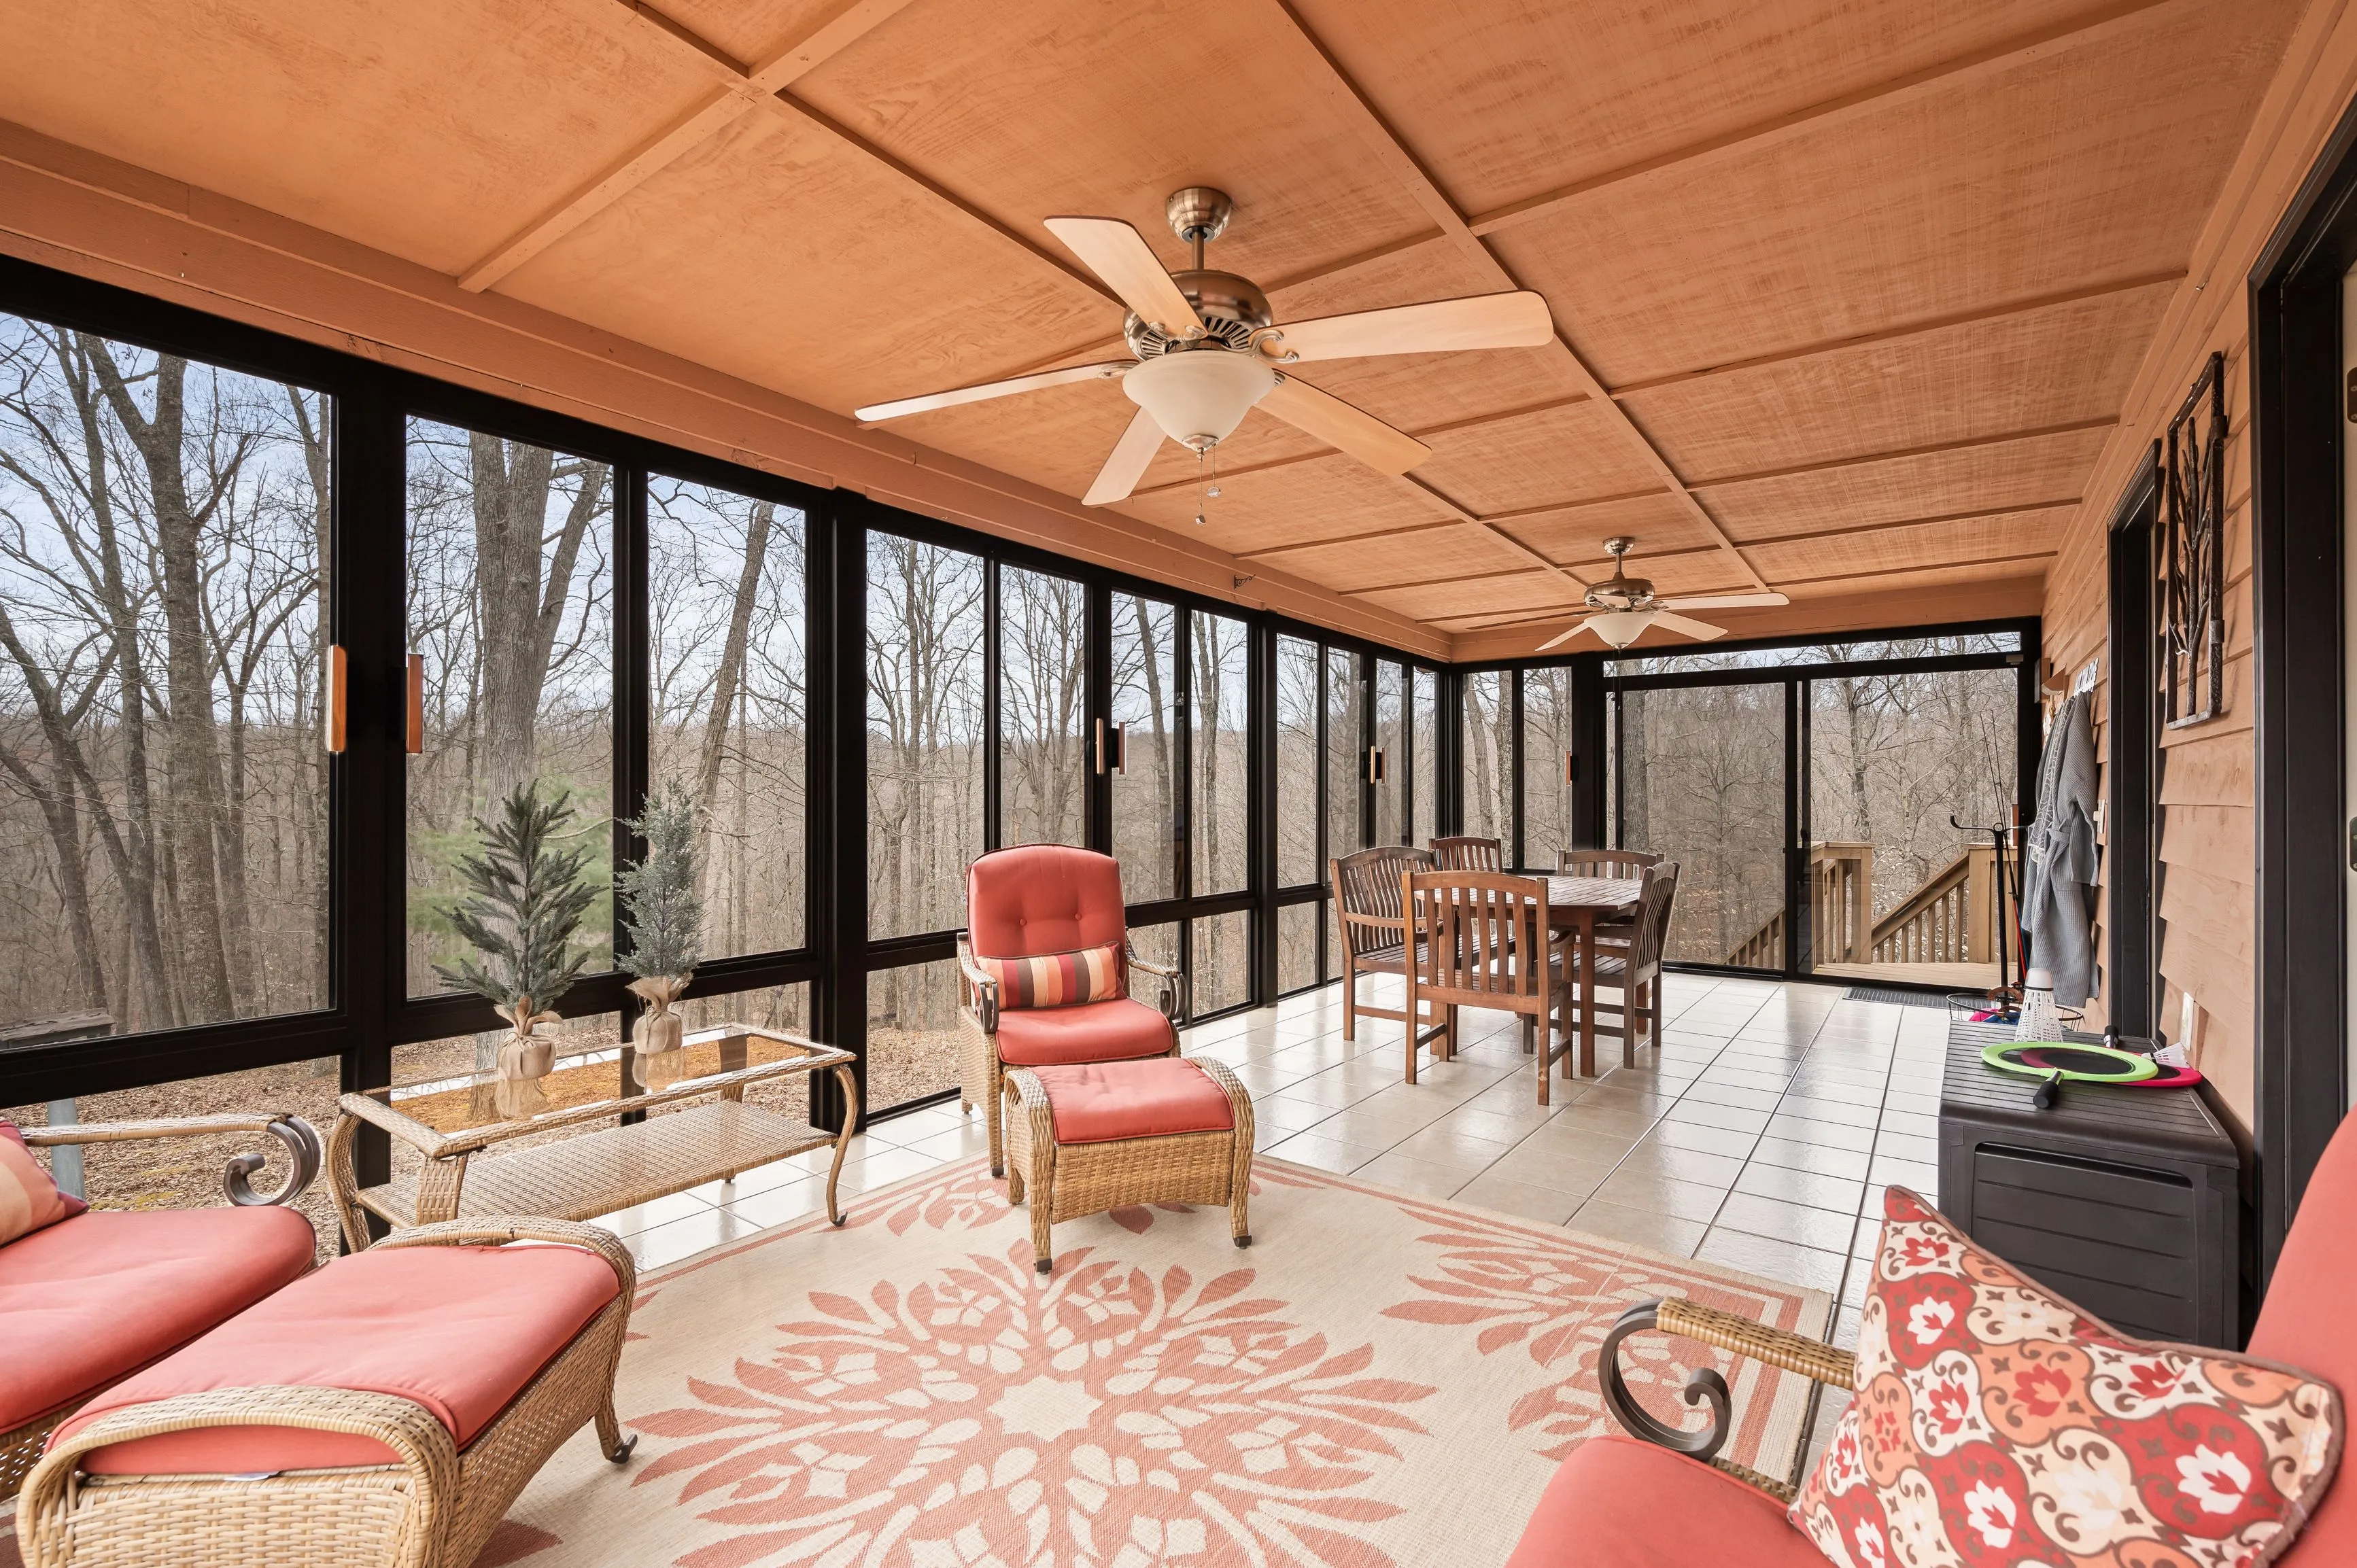 Spacious screened porch with wooden furniture, red cushions, ceiling fans, and a view of leafless trees.